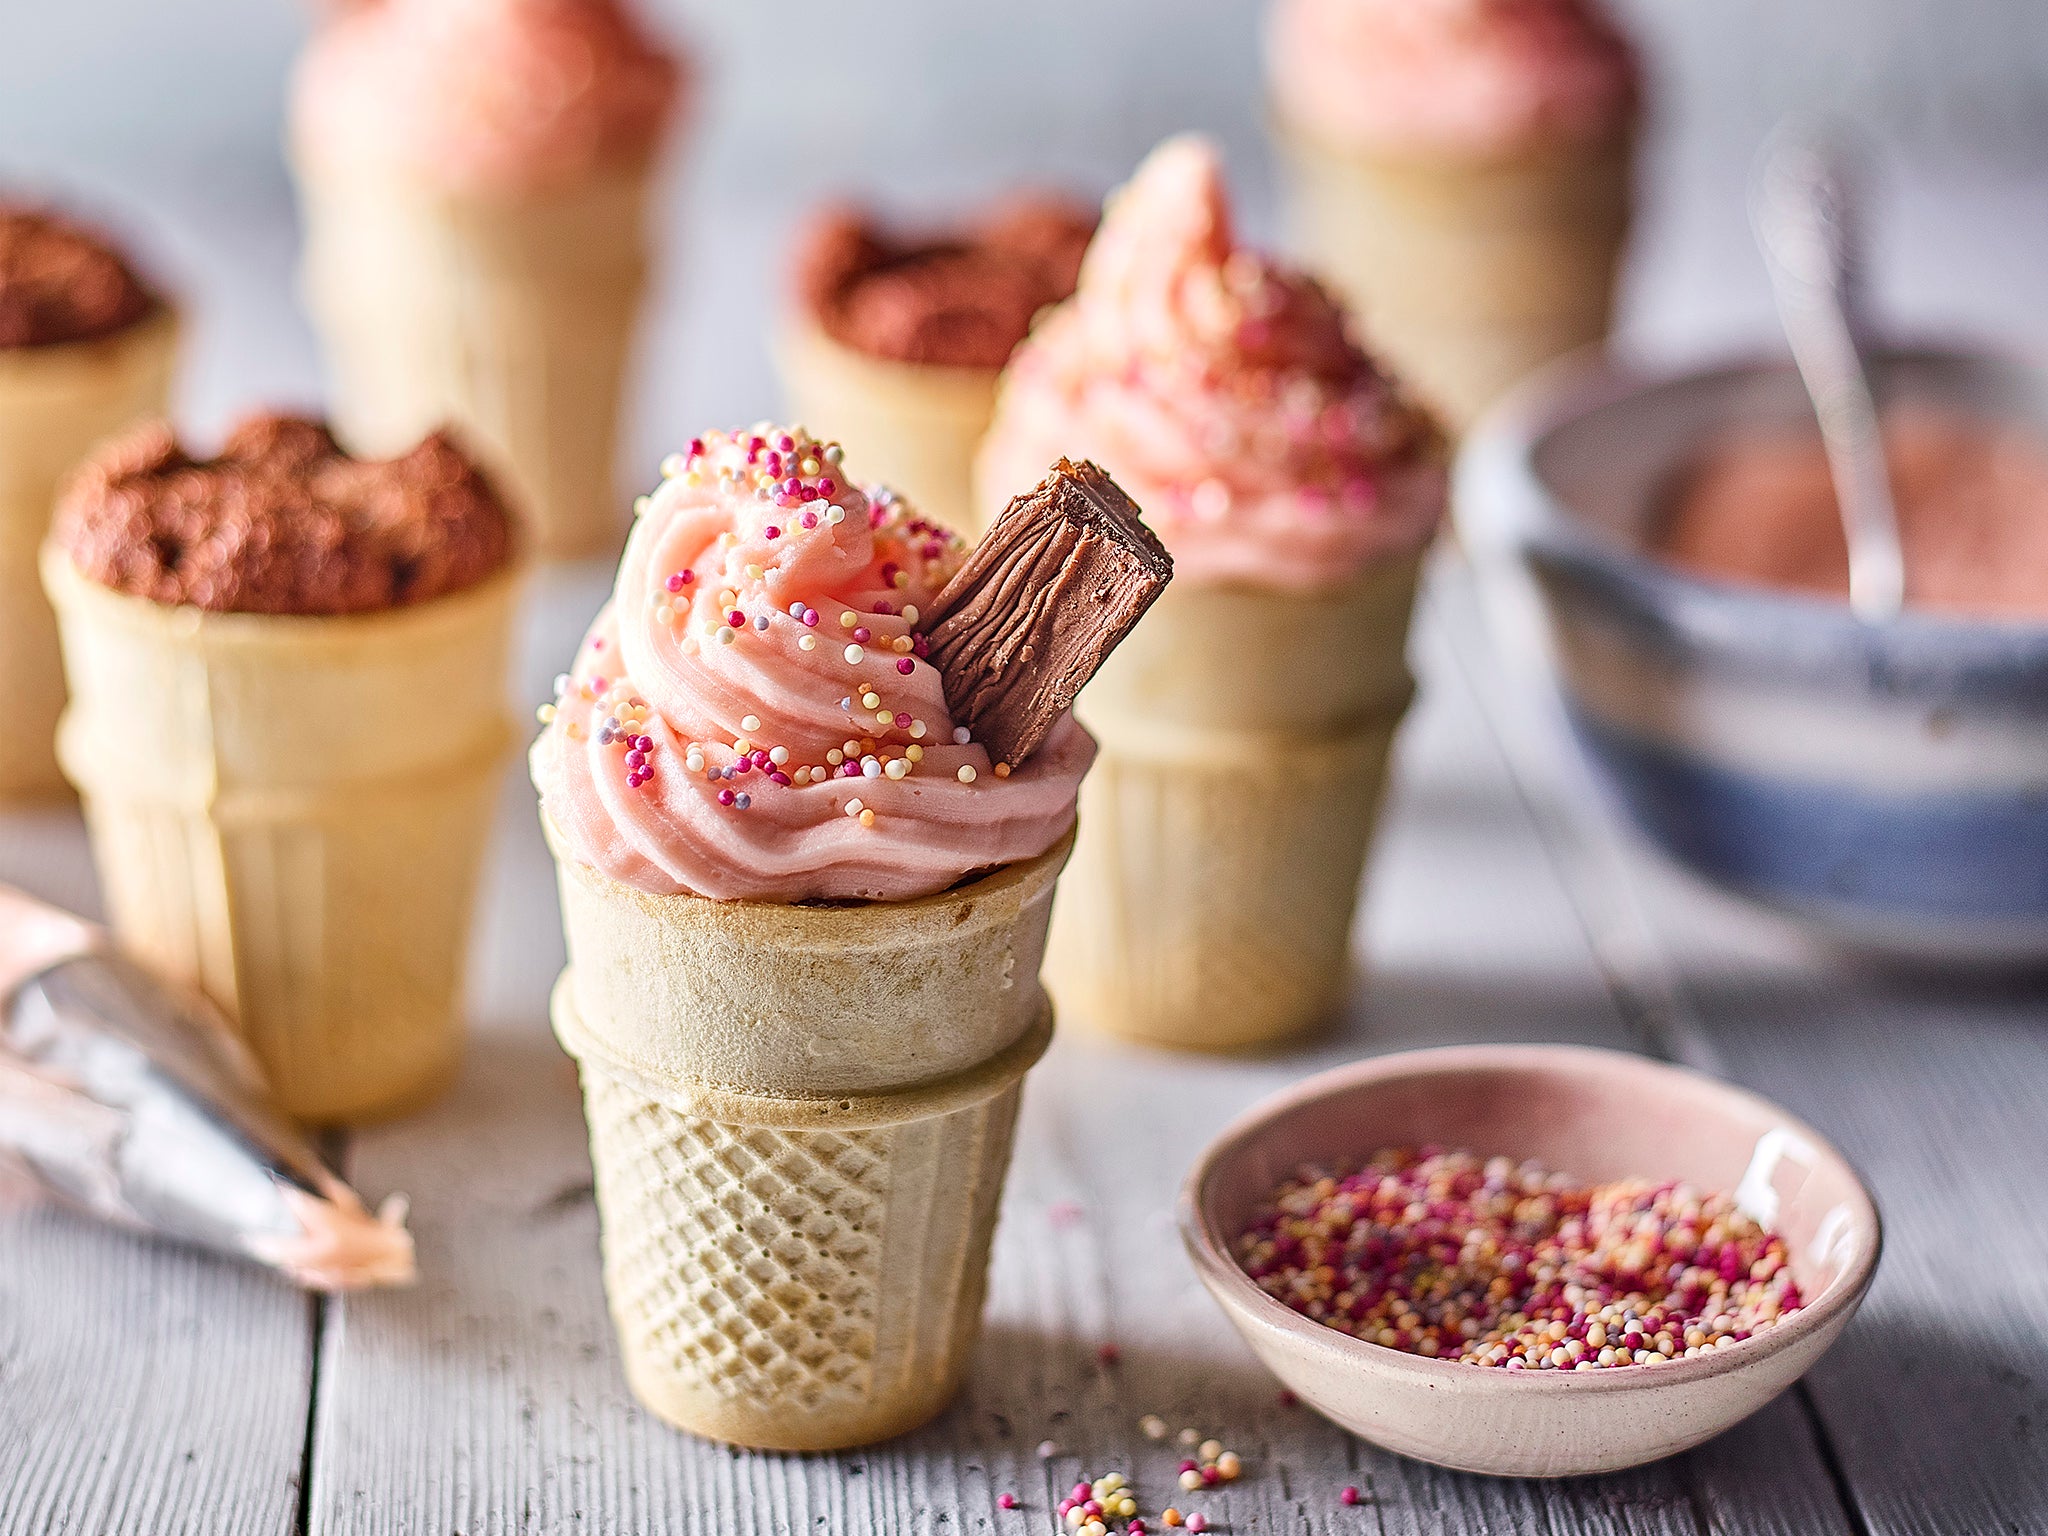 Can’t decide whether you fancy a cupcake or an ice cream? Have both with this fun recipe